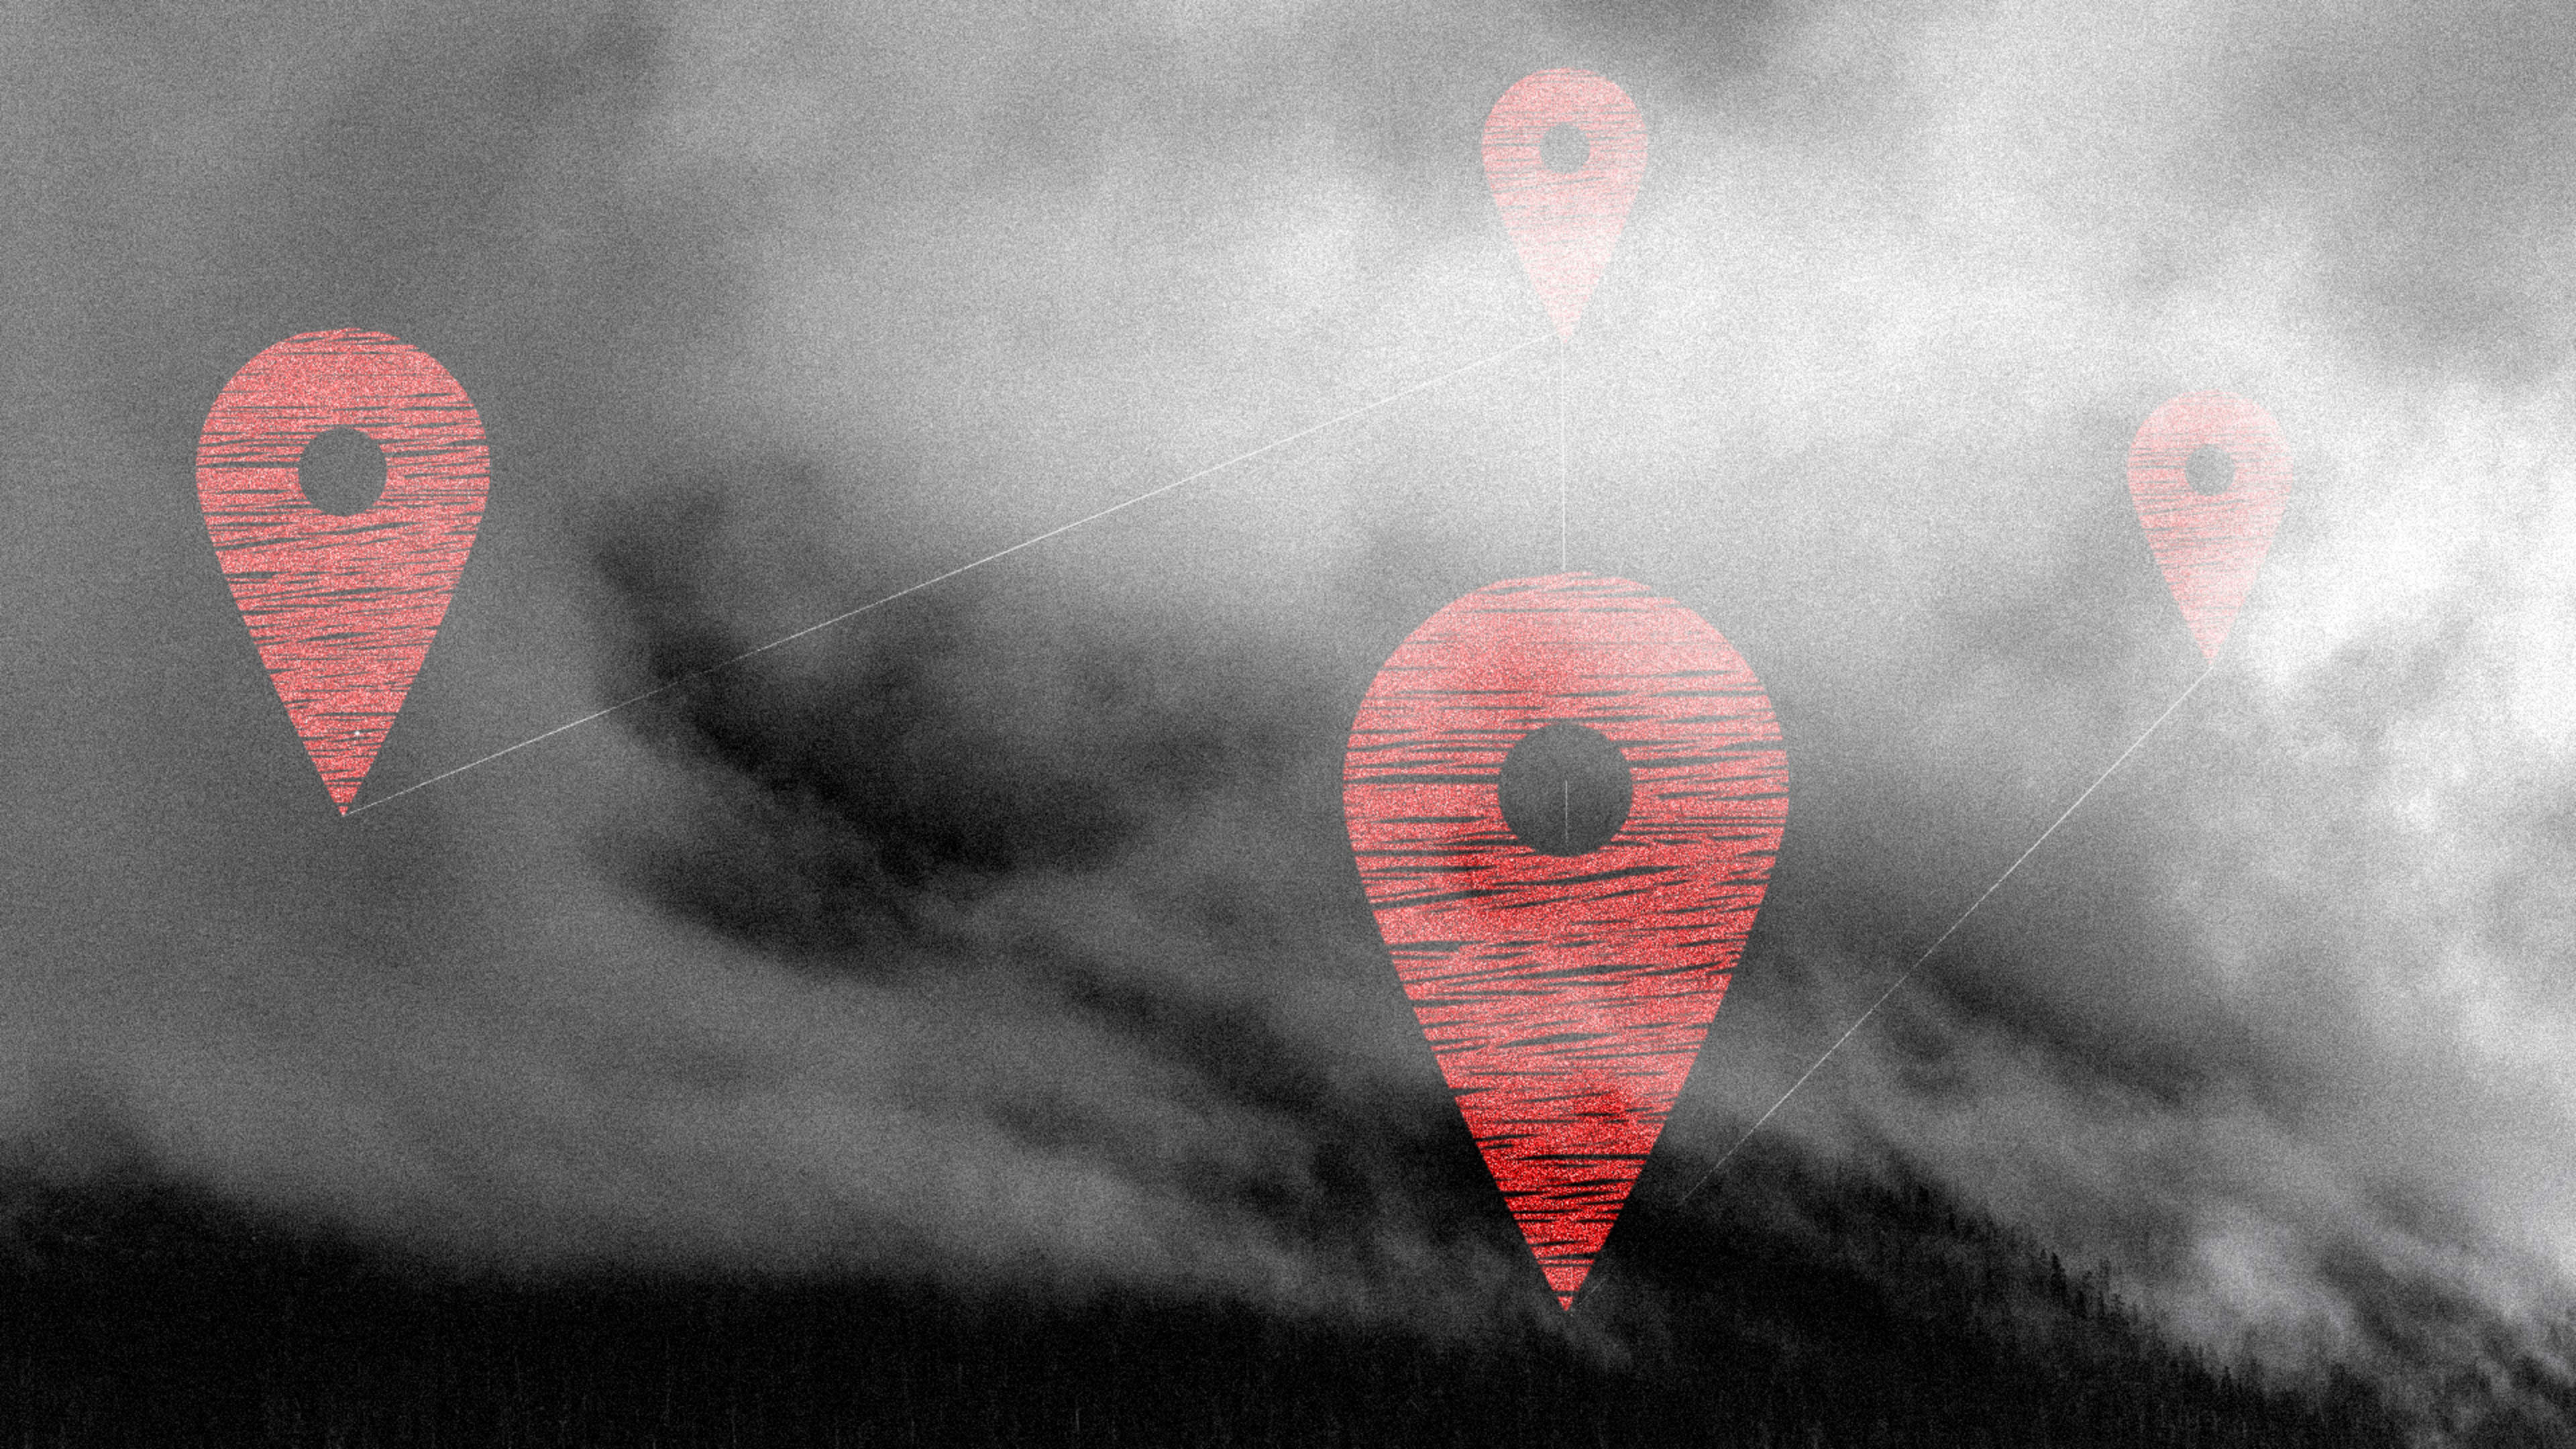 Fog Reveal: the app police are using to track people without a warrant